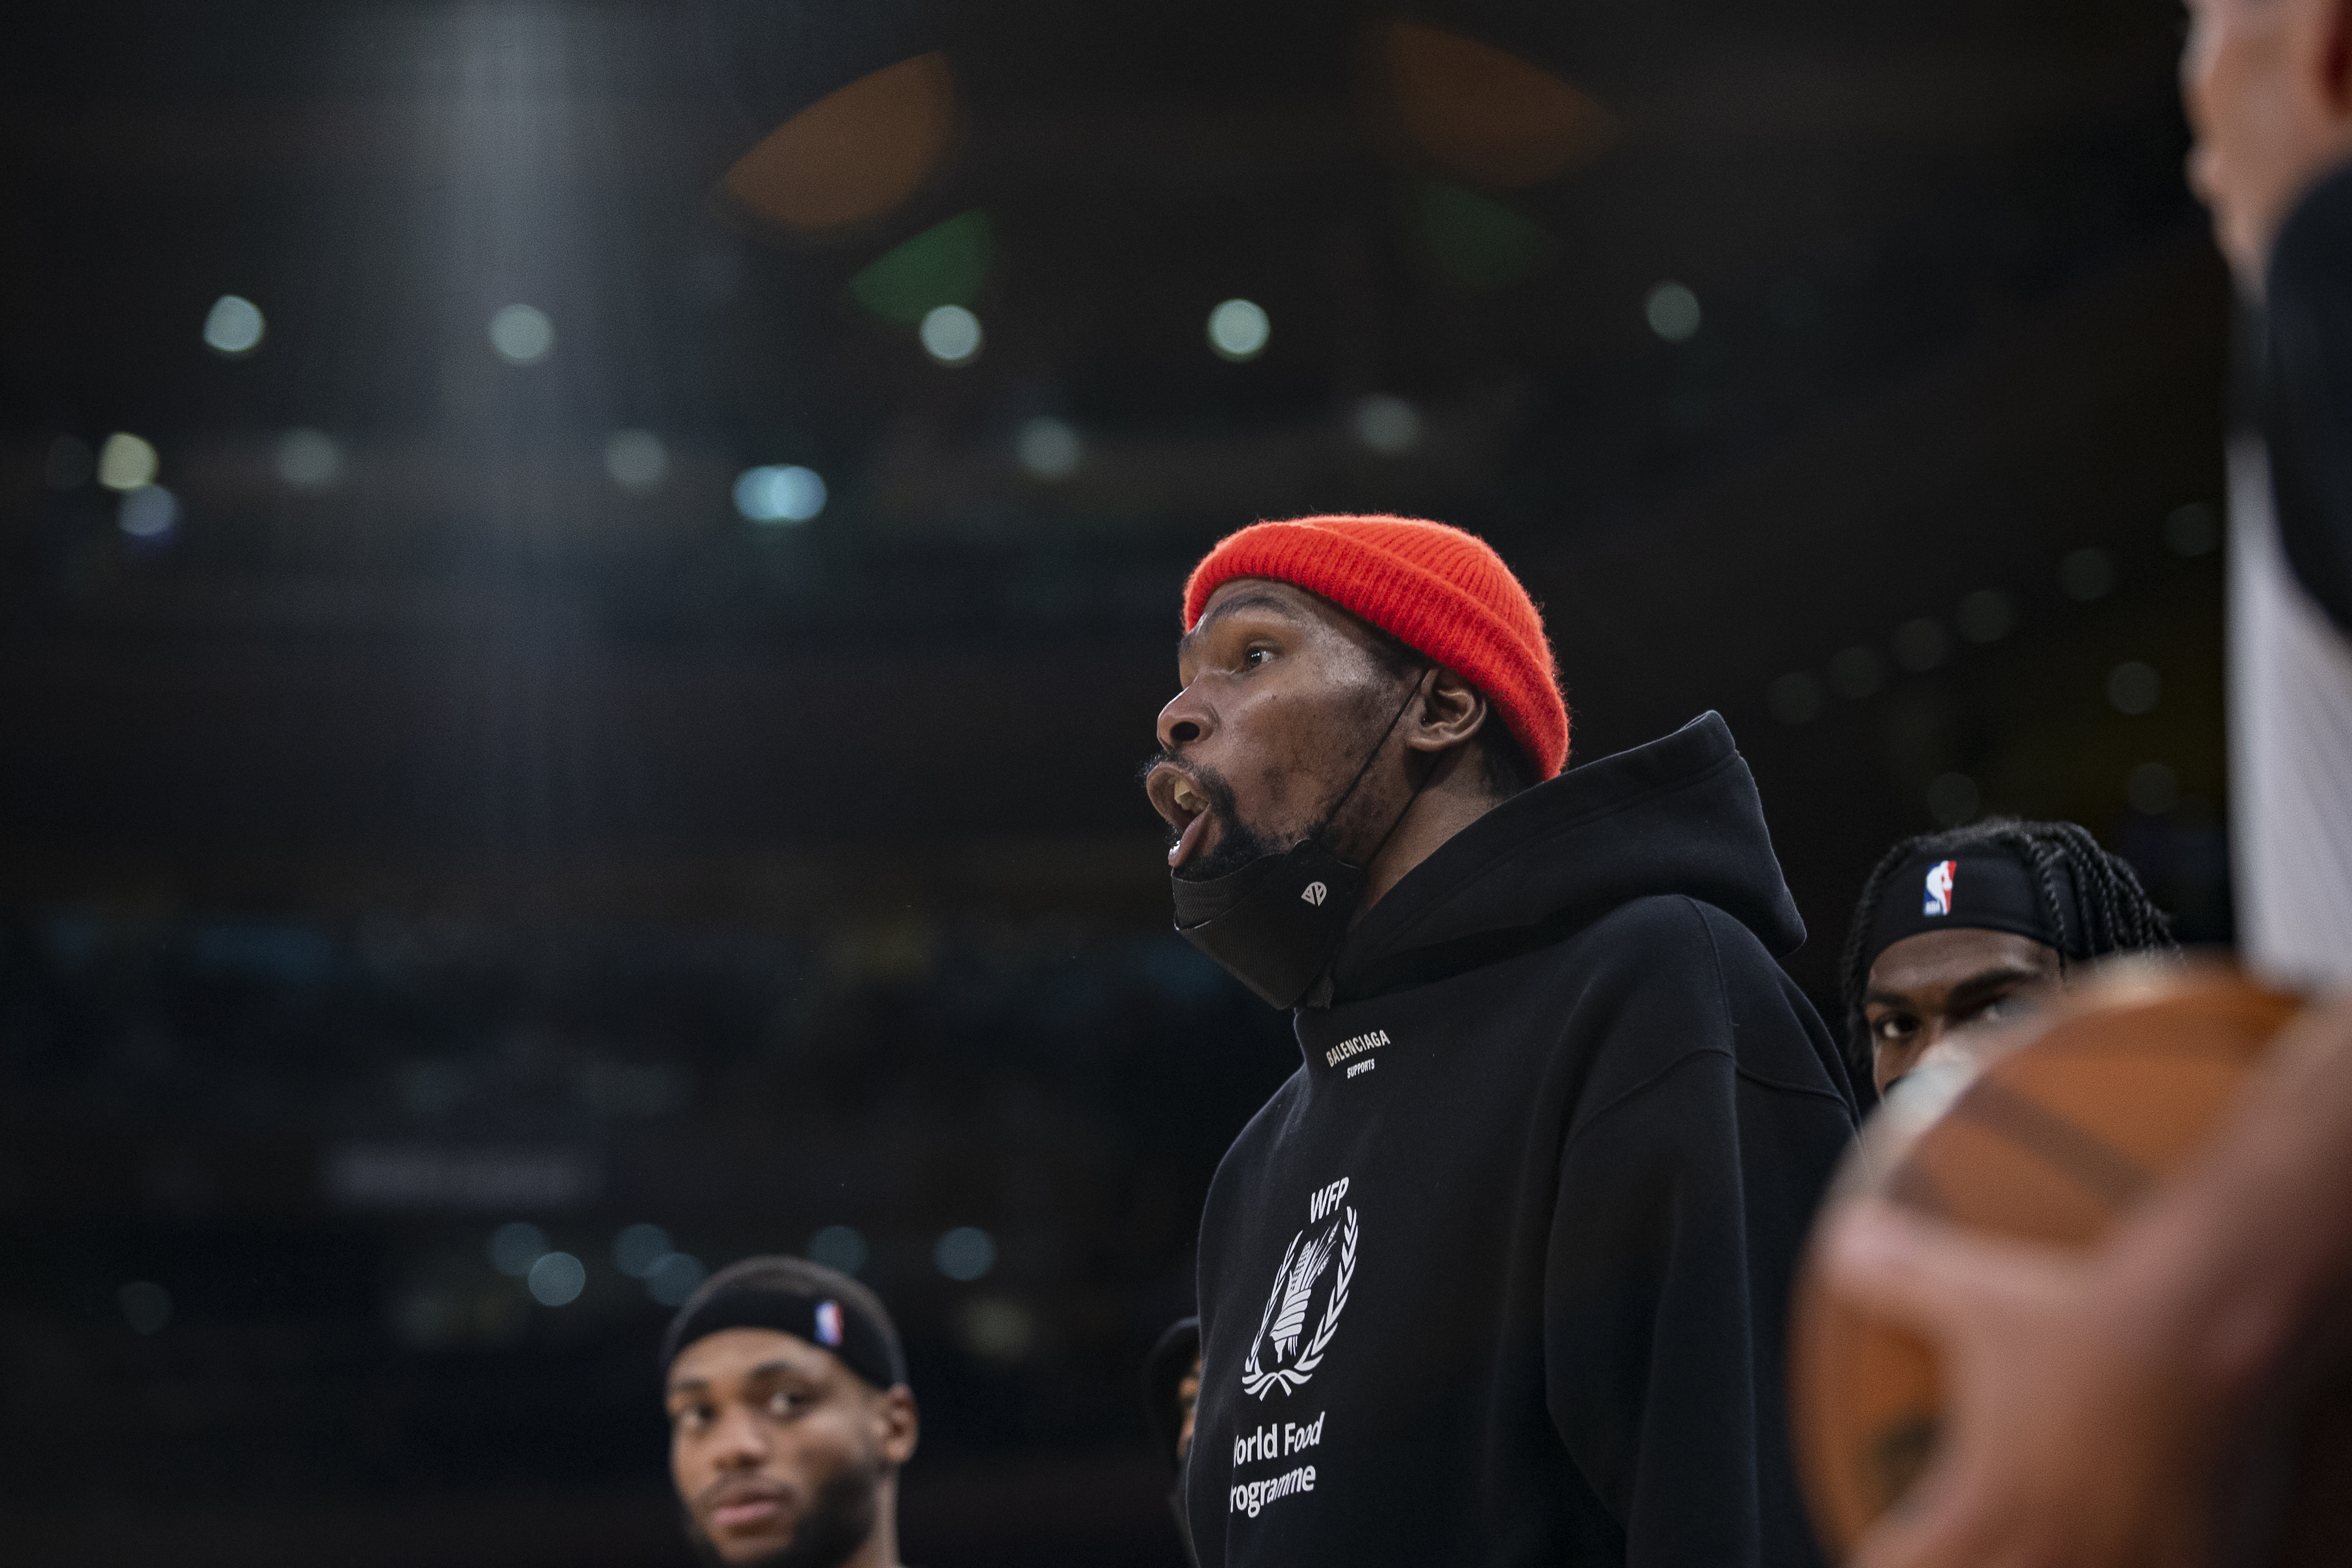 Brooklyn Nets star Kevin Durant reacts during an NBA game against the New York Knicks in February 2022